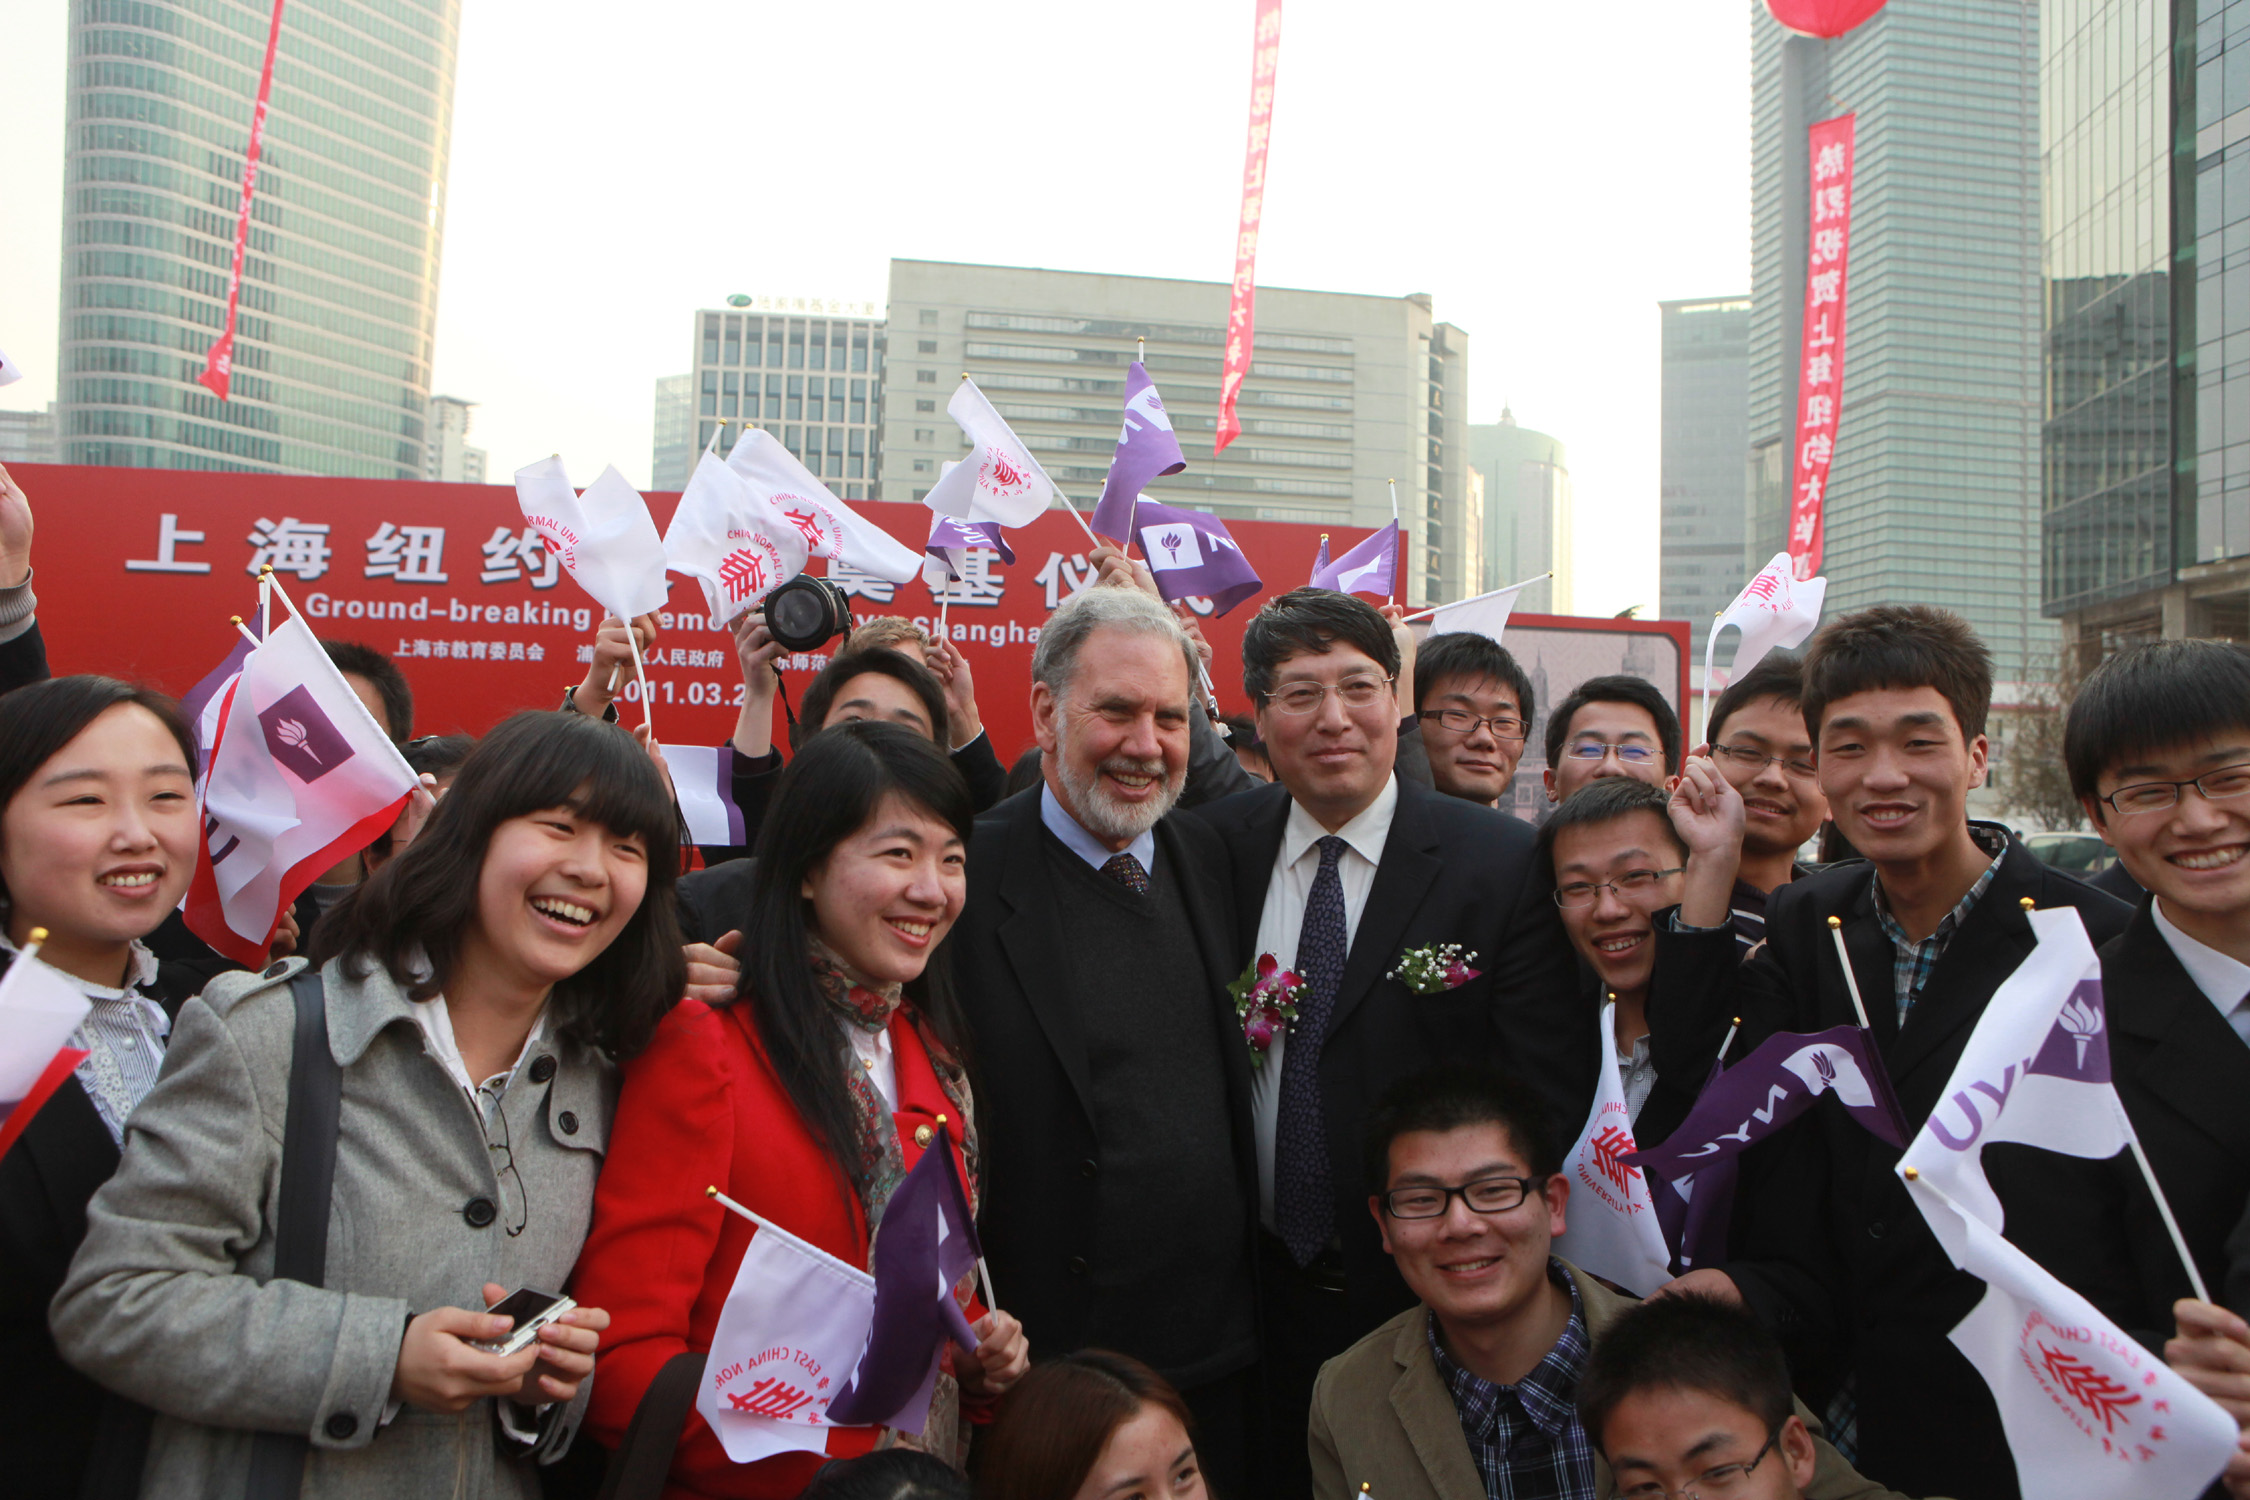 New York University president John Sexton and East China Normal University president Yu Lizhong pose with students at the ground-breaking ceremony for NYU Shanghai on March 28, 2011 in Shanghai, China. (VCG—VCG via Getty Images)